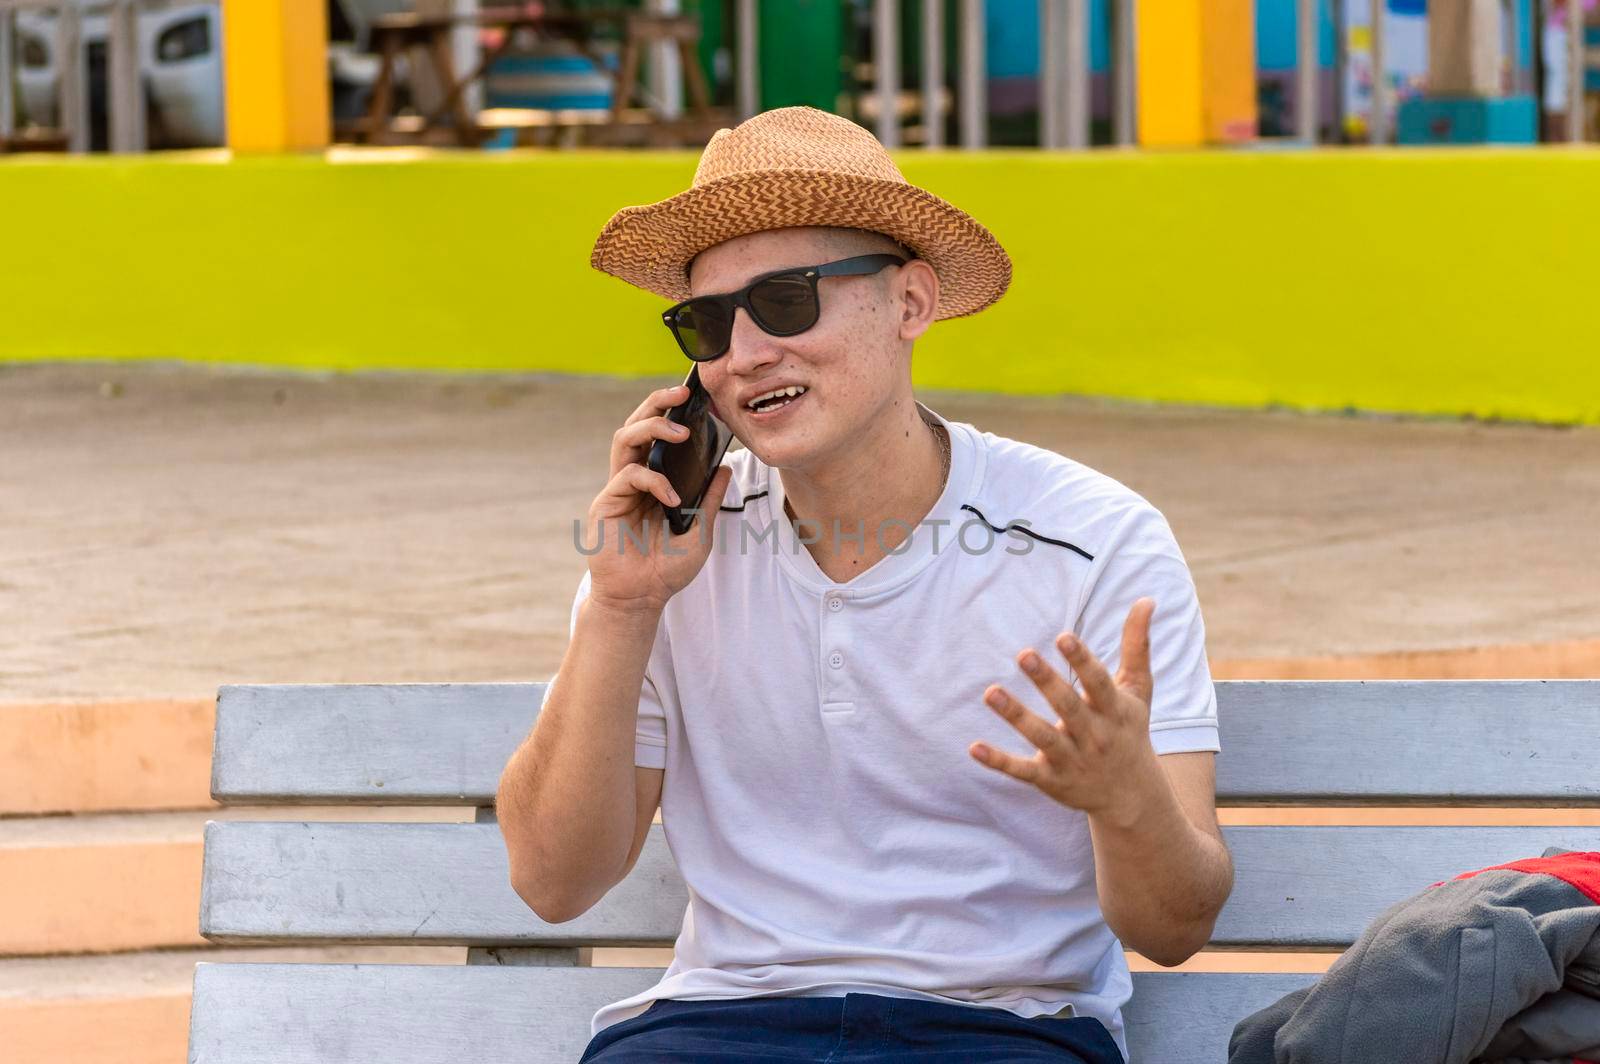 An attractive guy calling on a cell phone on a bench, a man sitting on a bench calling on the phone.